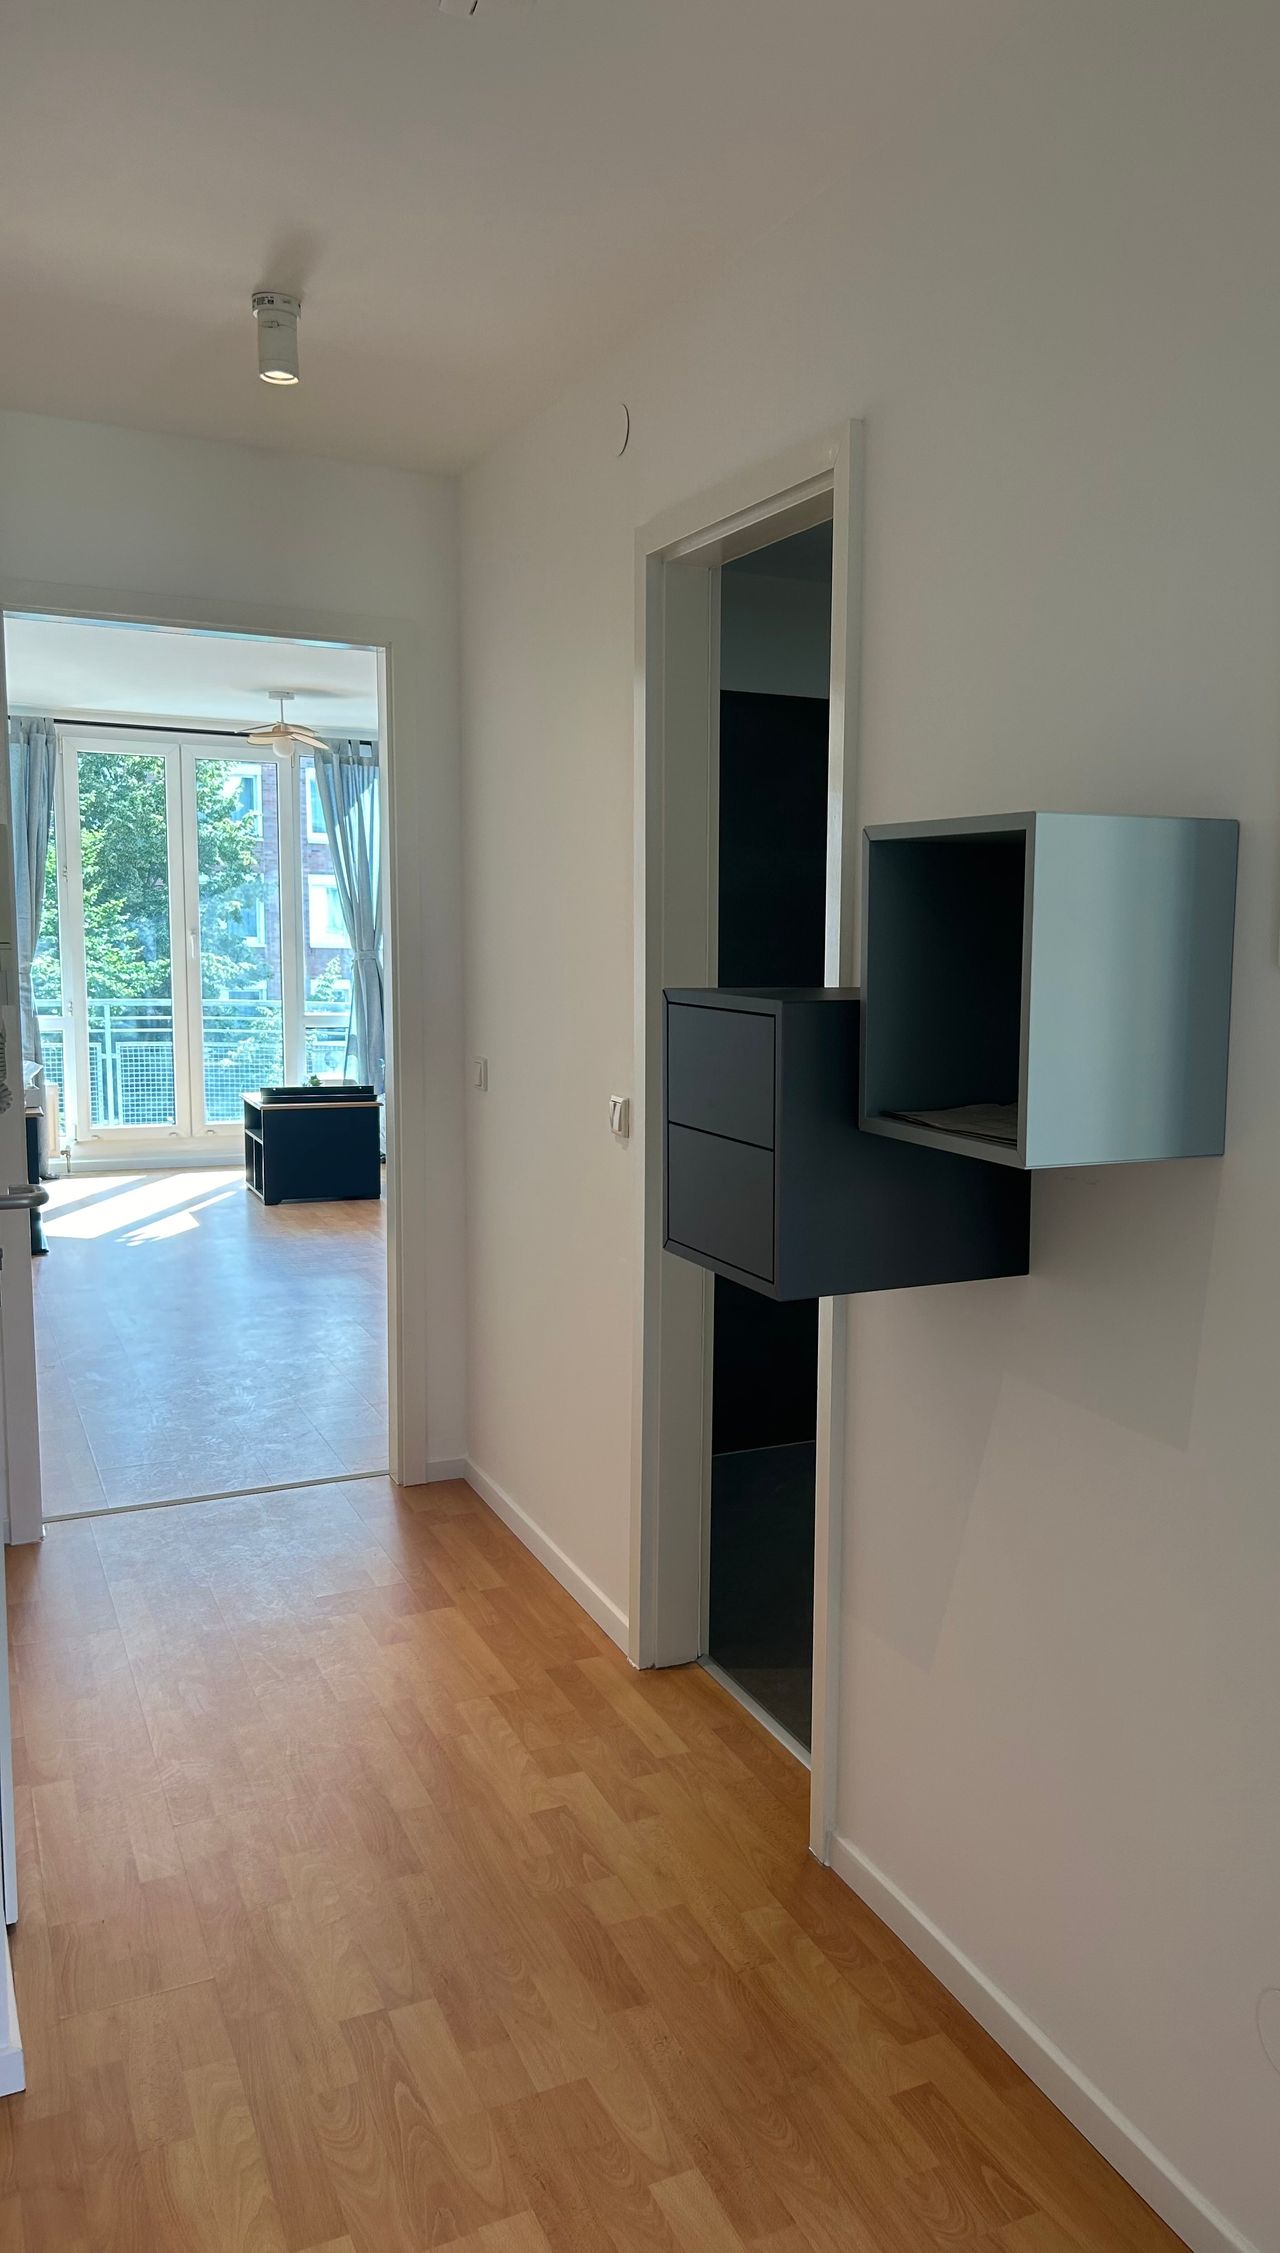 Newly renovated quiet & bright 2 room flat in Weissensee